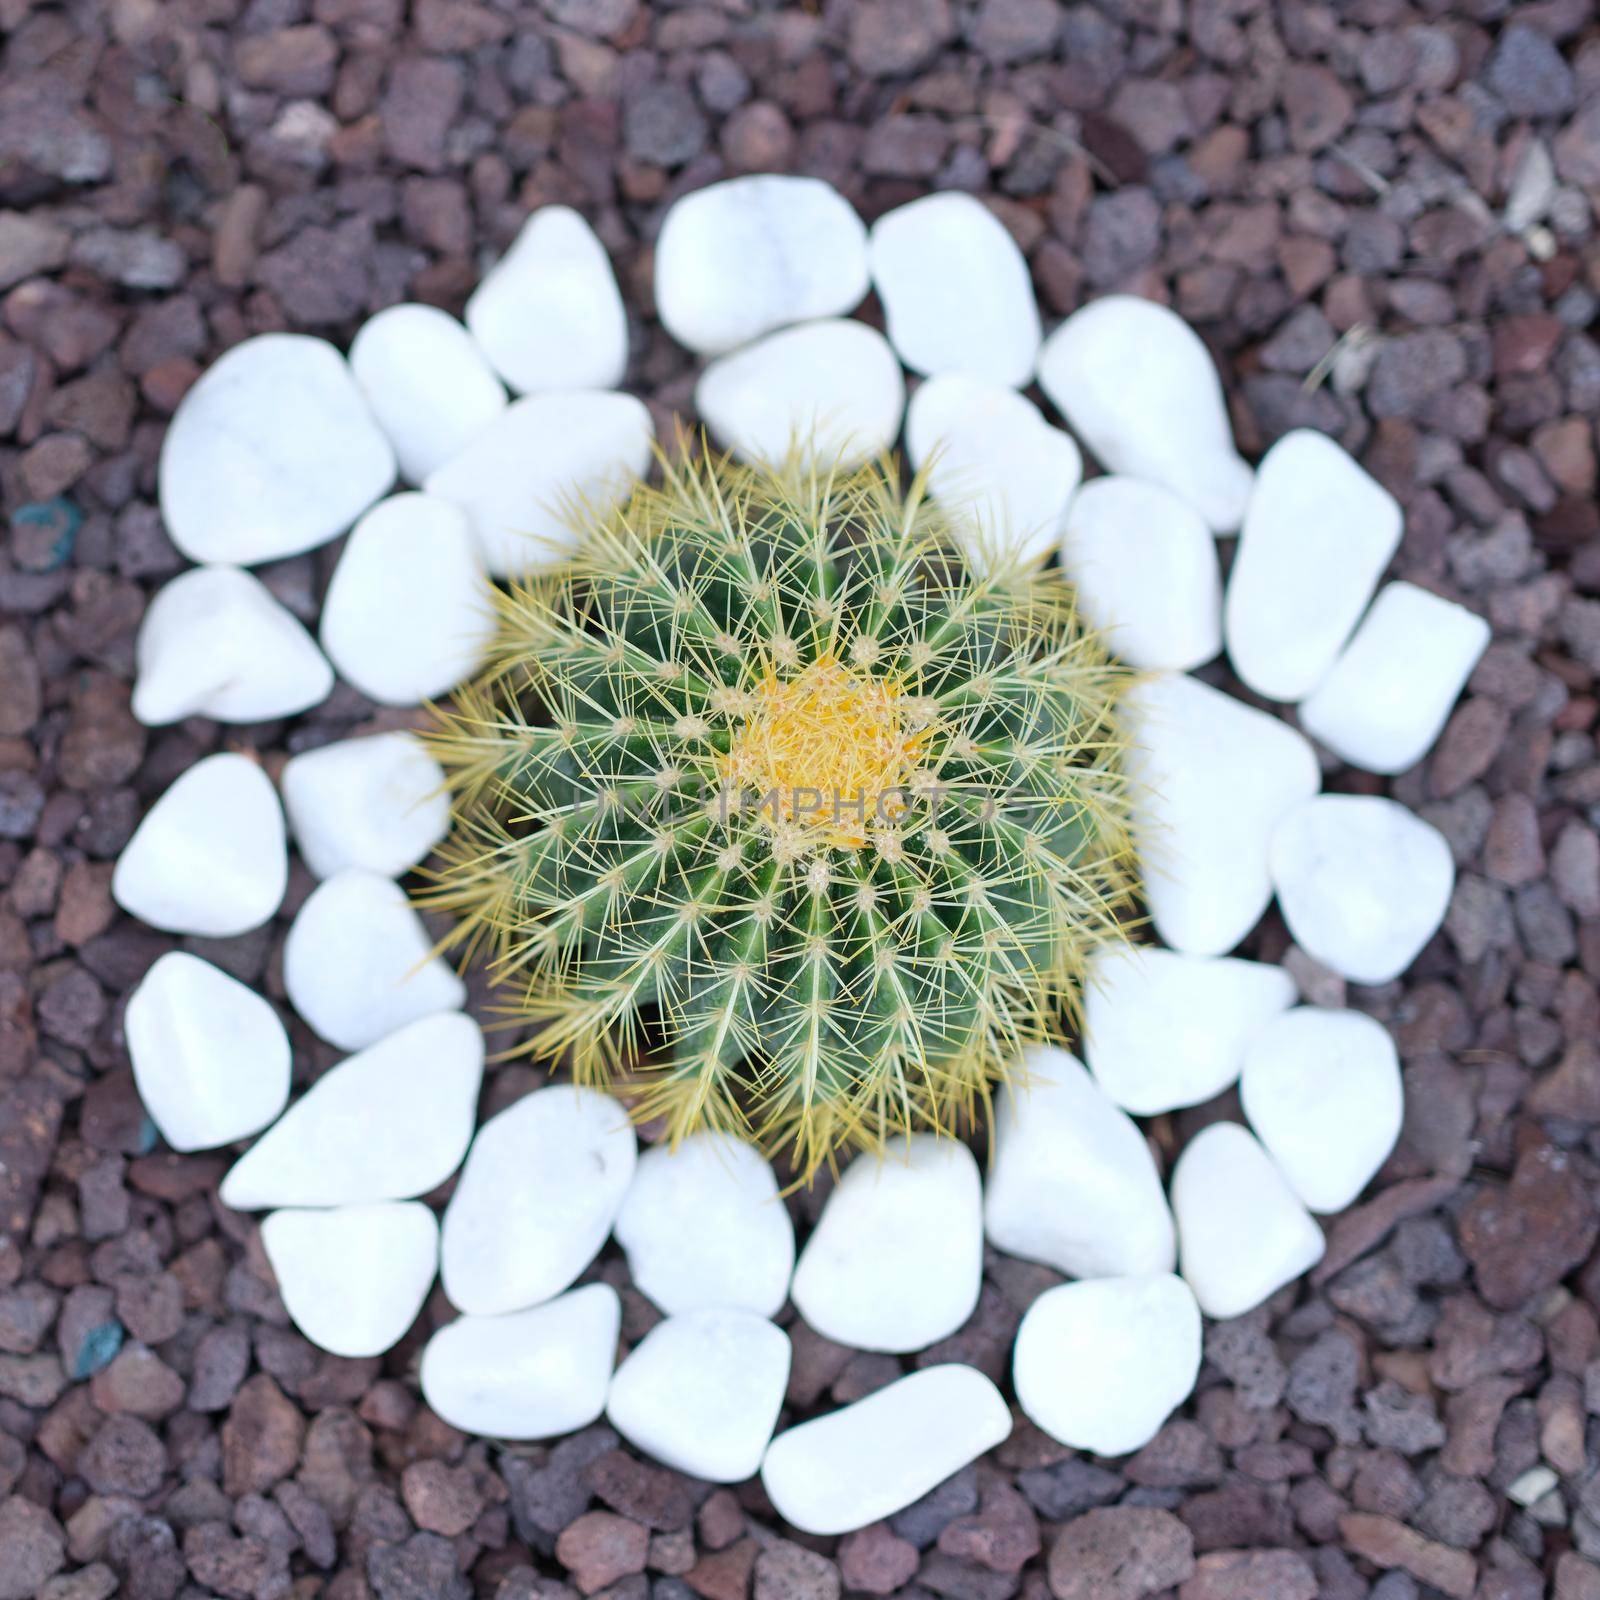 Beautiful little cactus grows in flower bed by kuprevich